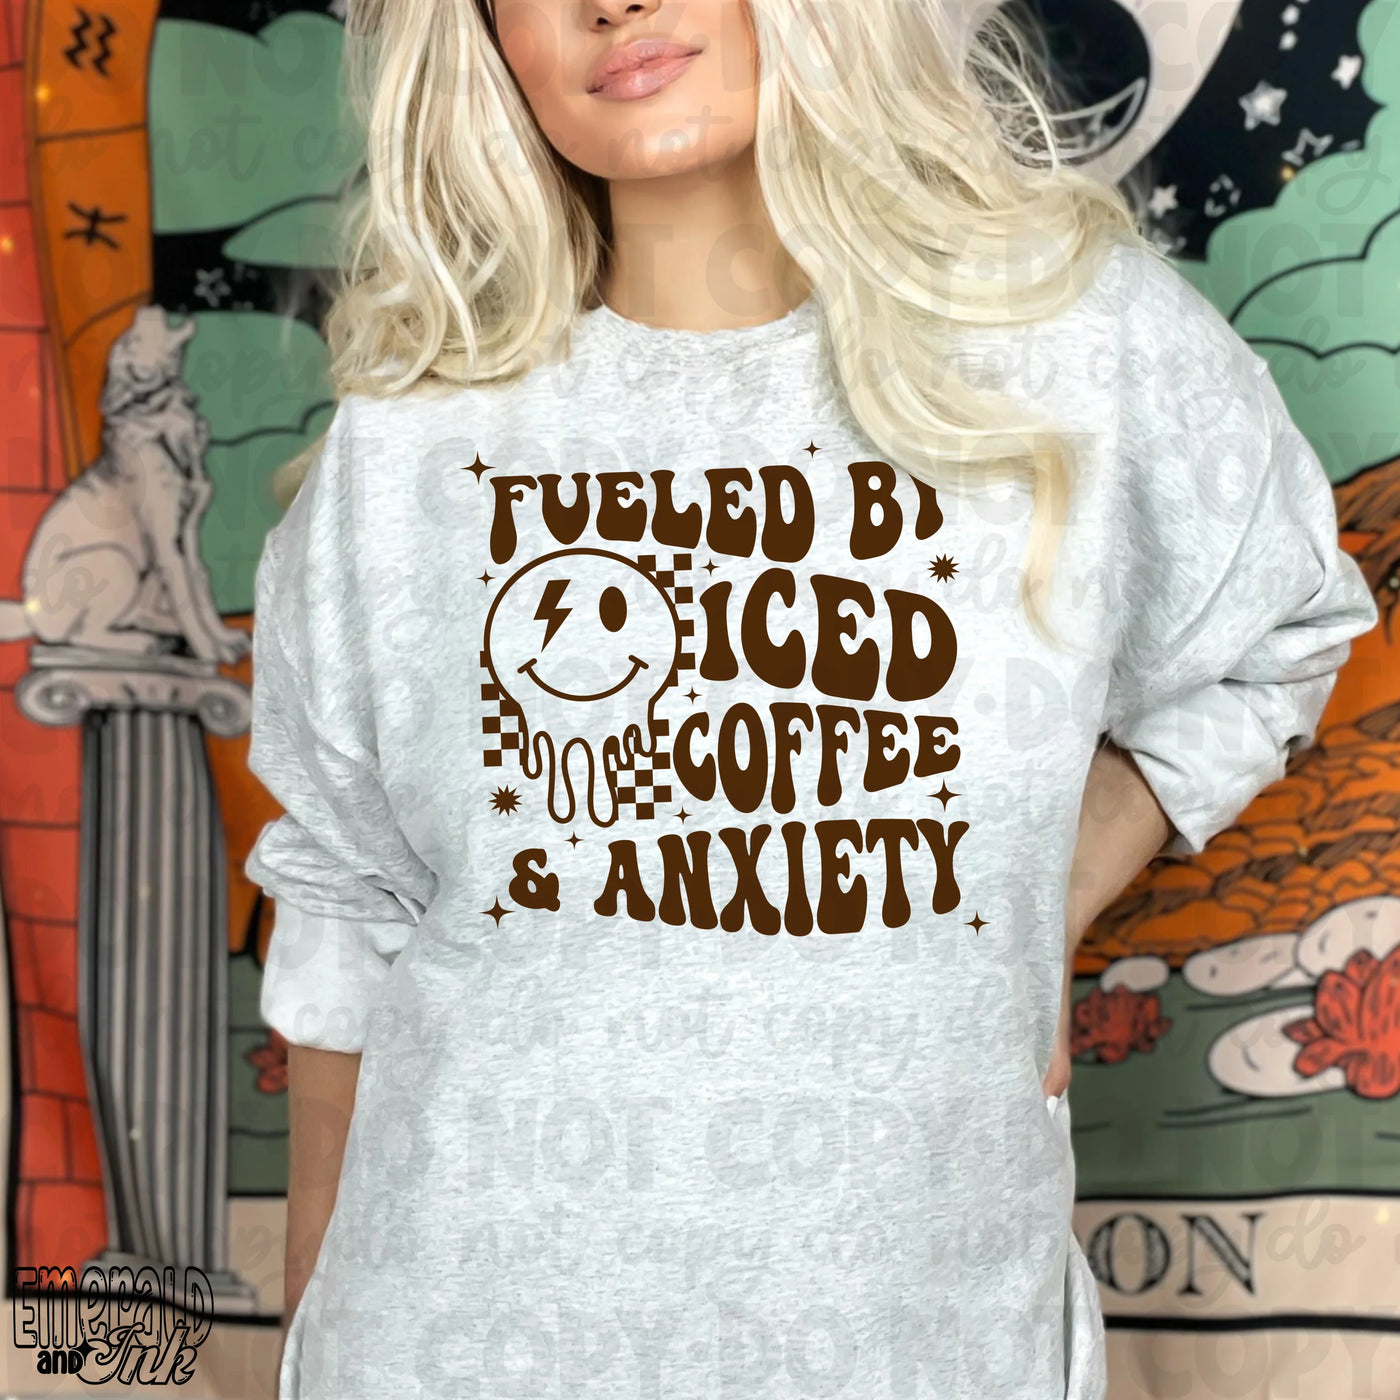 "Fueled by Iced Coffee & Anxiety" Front/Back Sweatshirt or T-shirt